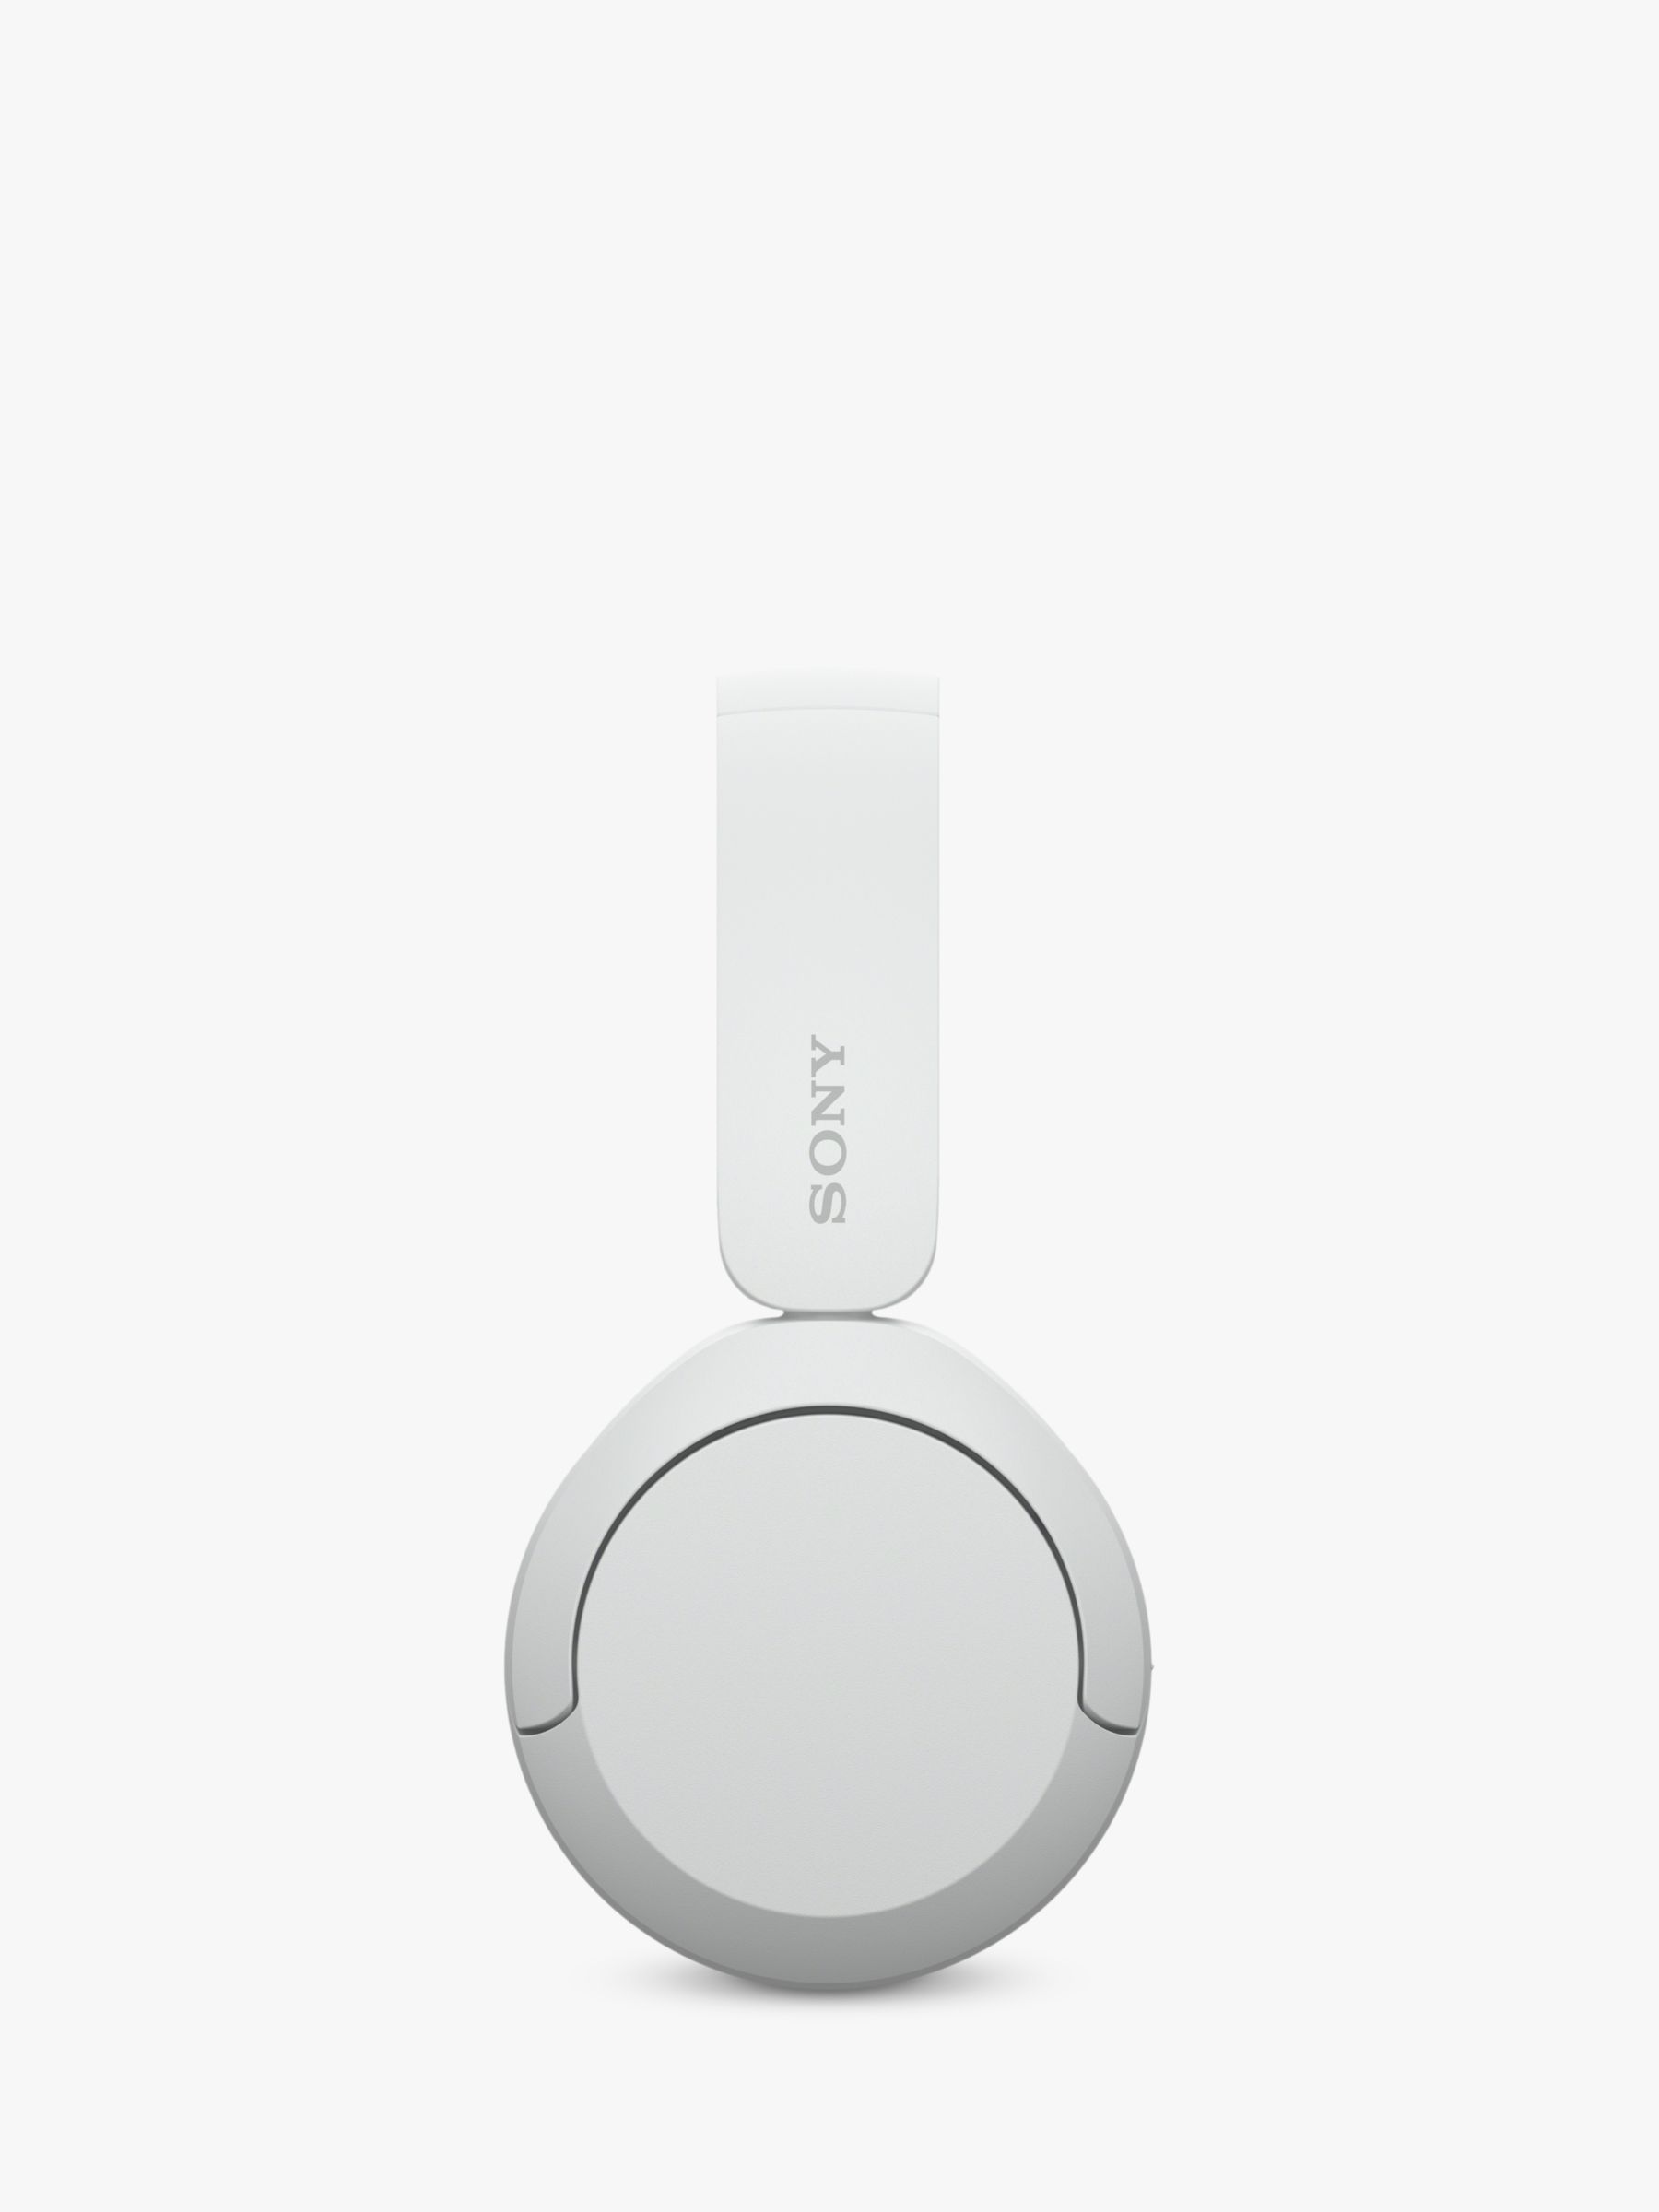 Buy Sony WH-CH520 Wireless Headphones with Microphone - White